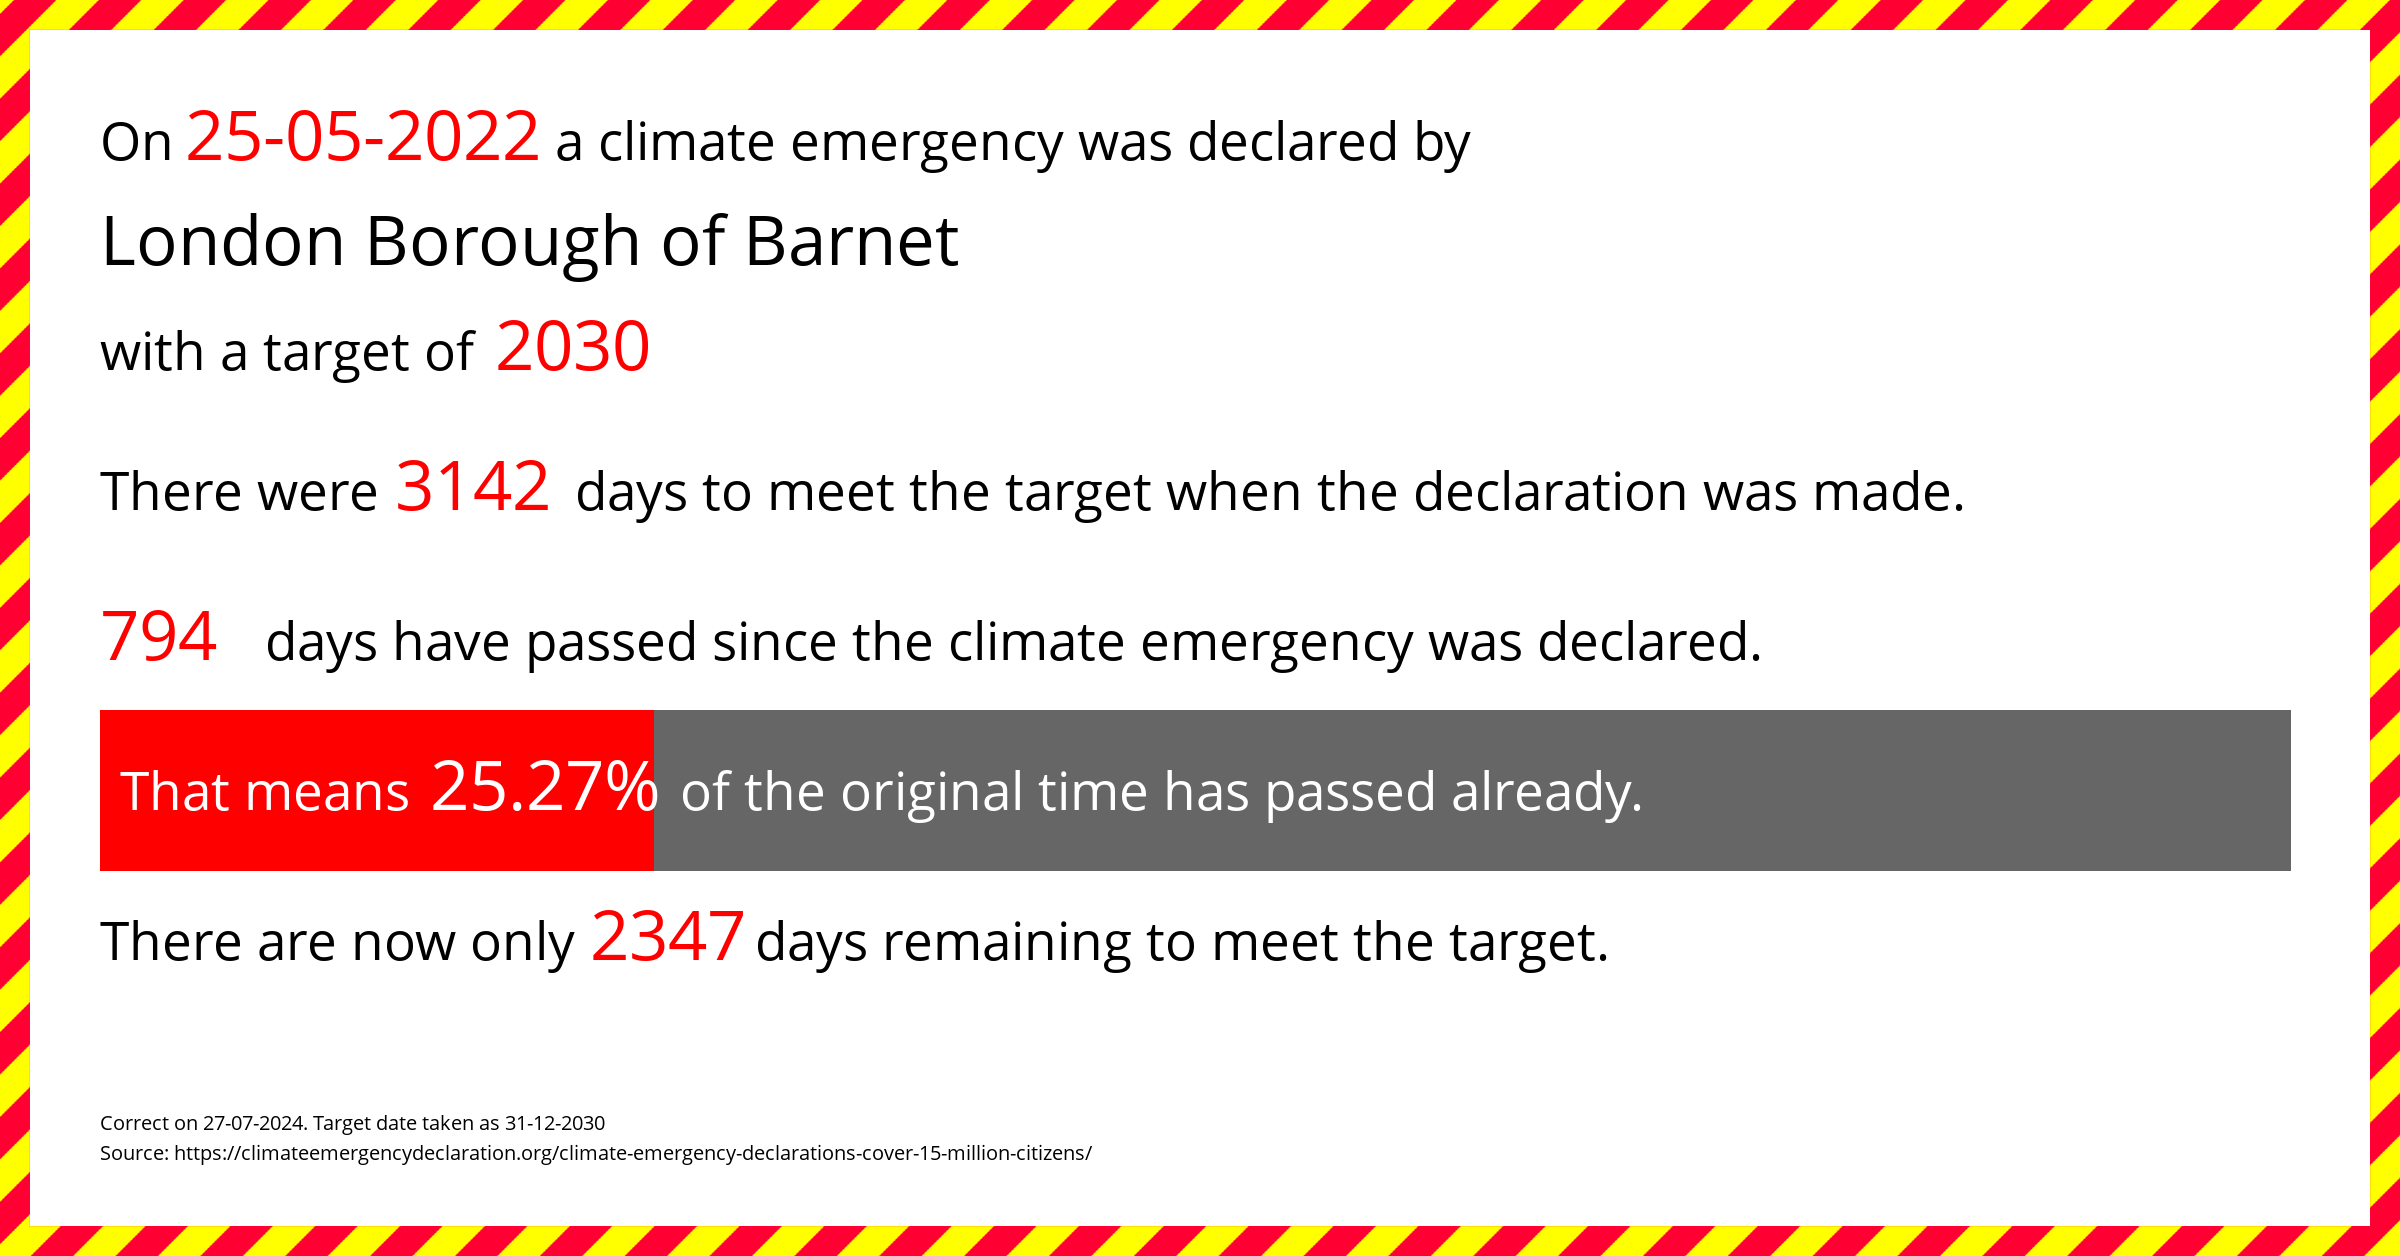 London Borough of Barnet declared a Climate emergency on Wednesday 25th May 2022, with a target of 2030.